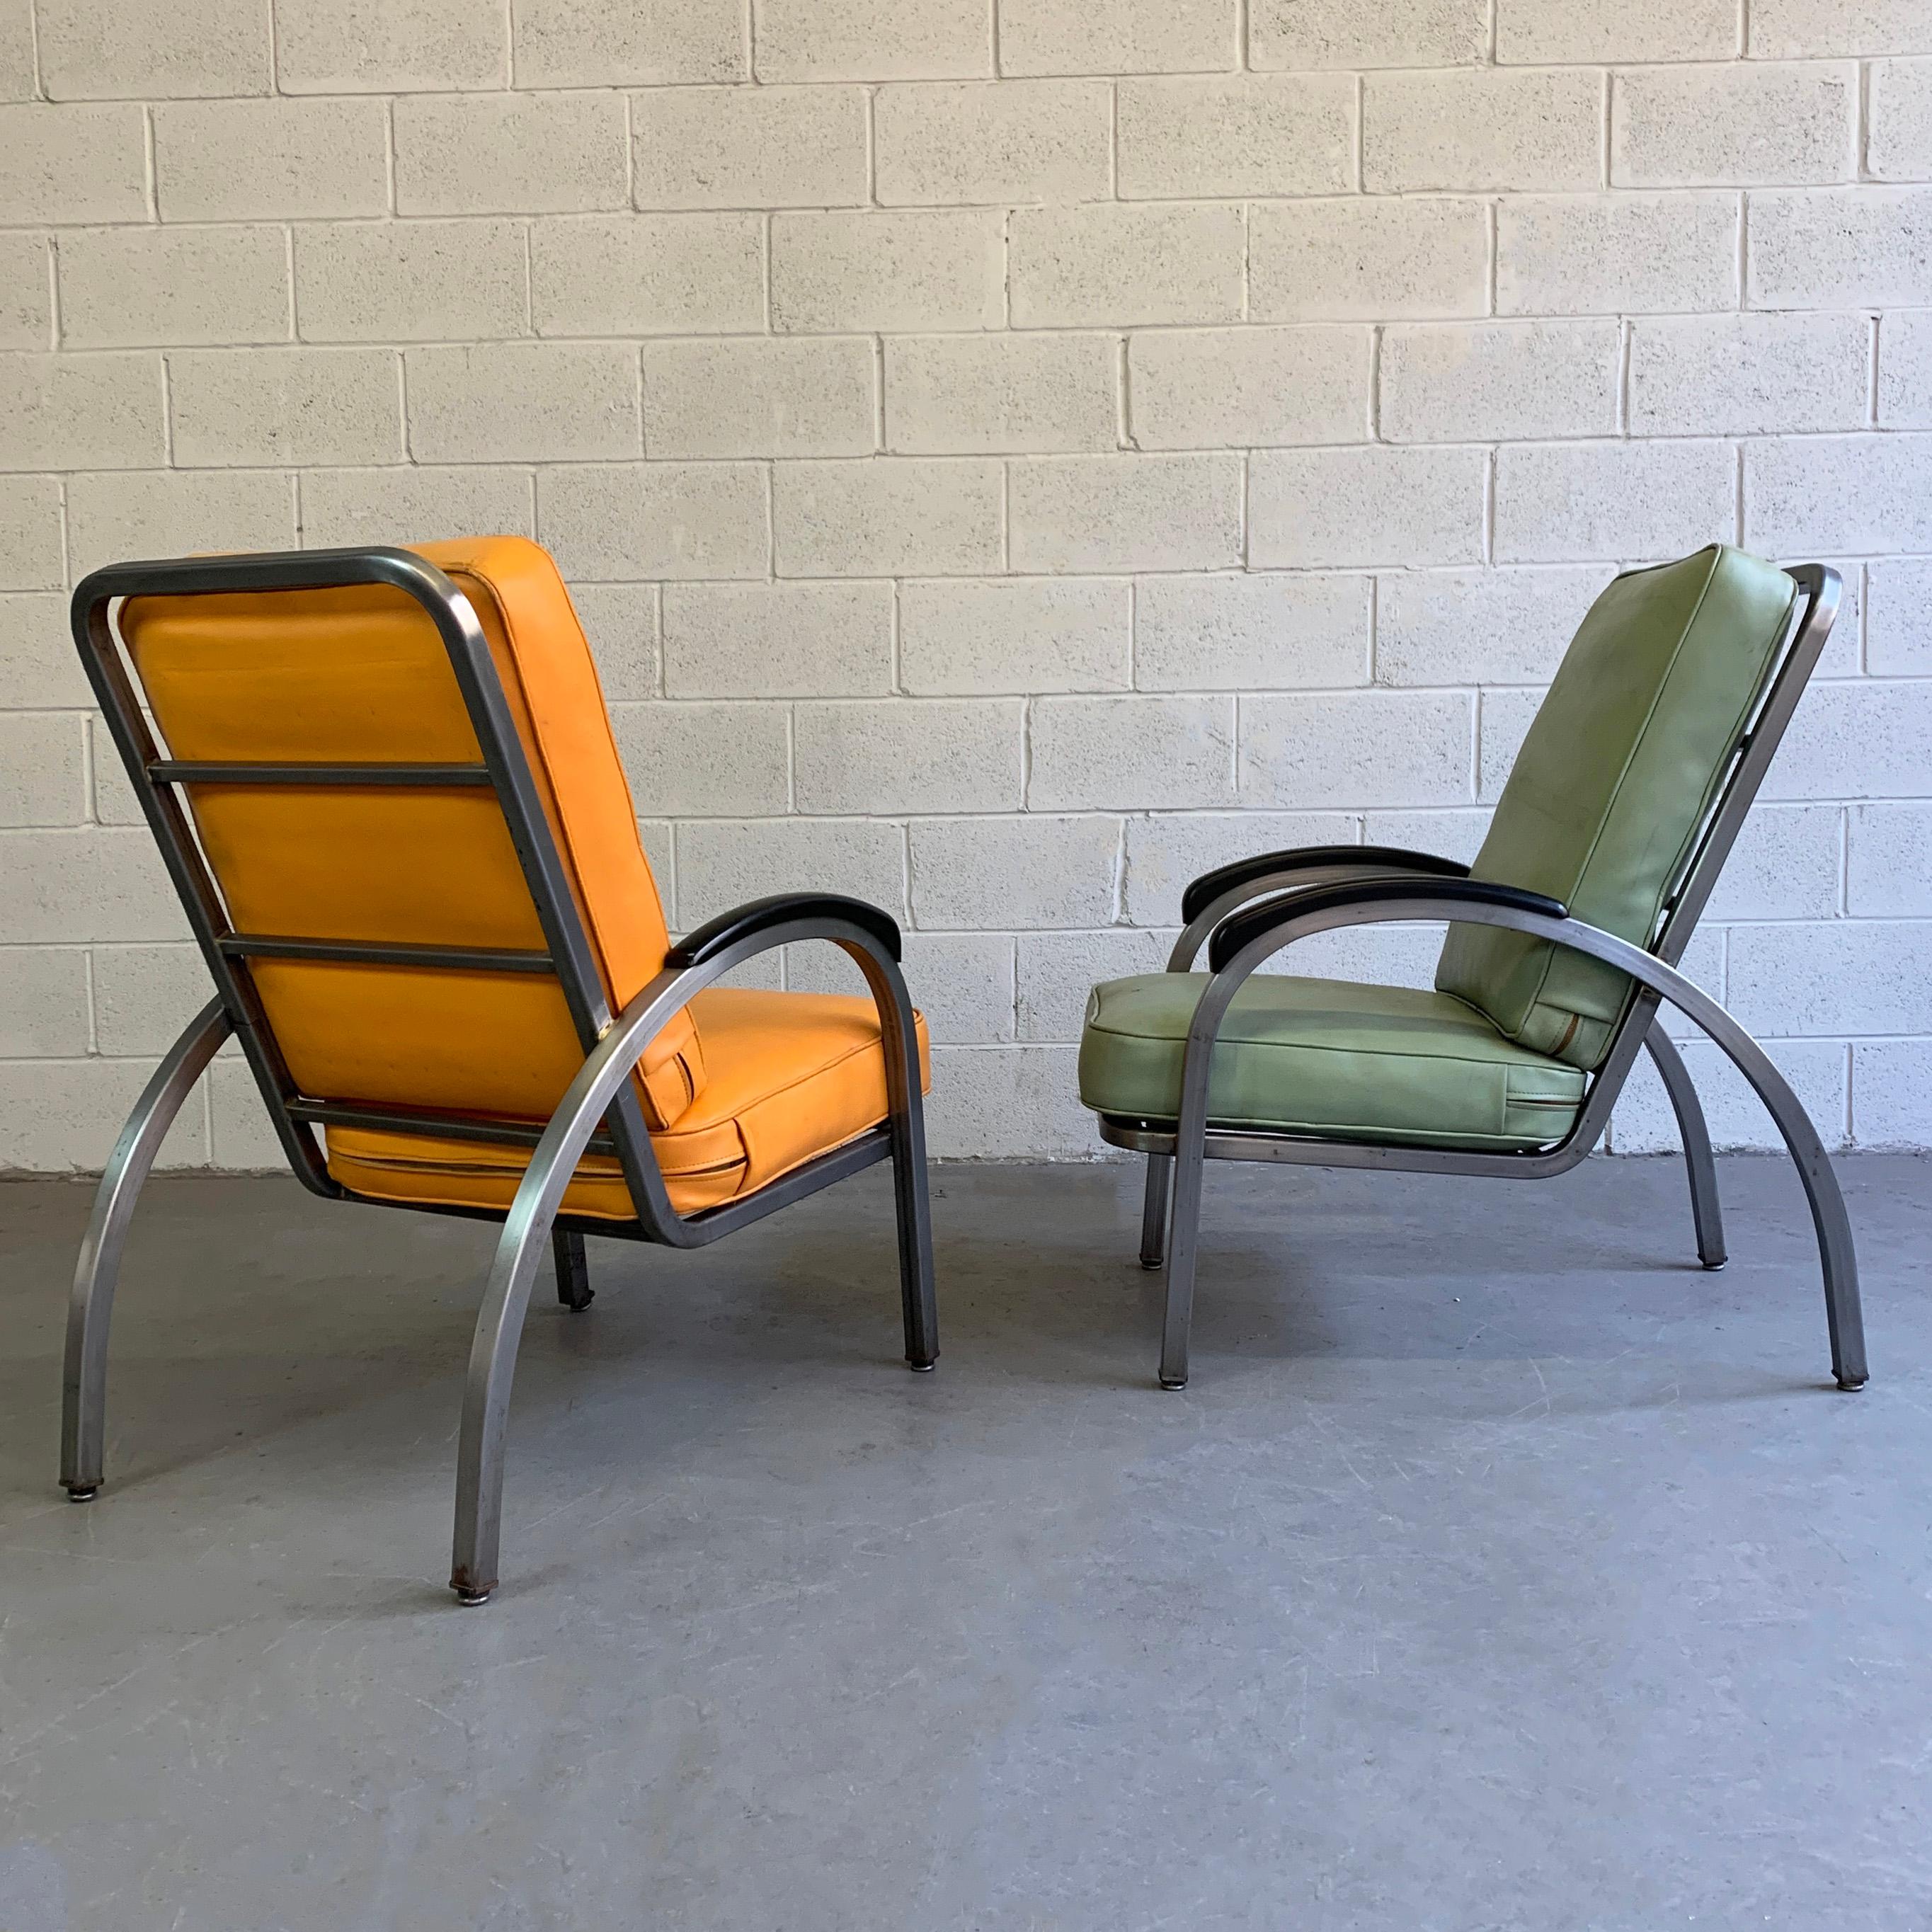 American Art Deco Steel Armchairs by Norman Bel Geddes for Simmons Company Furniture